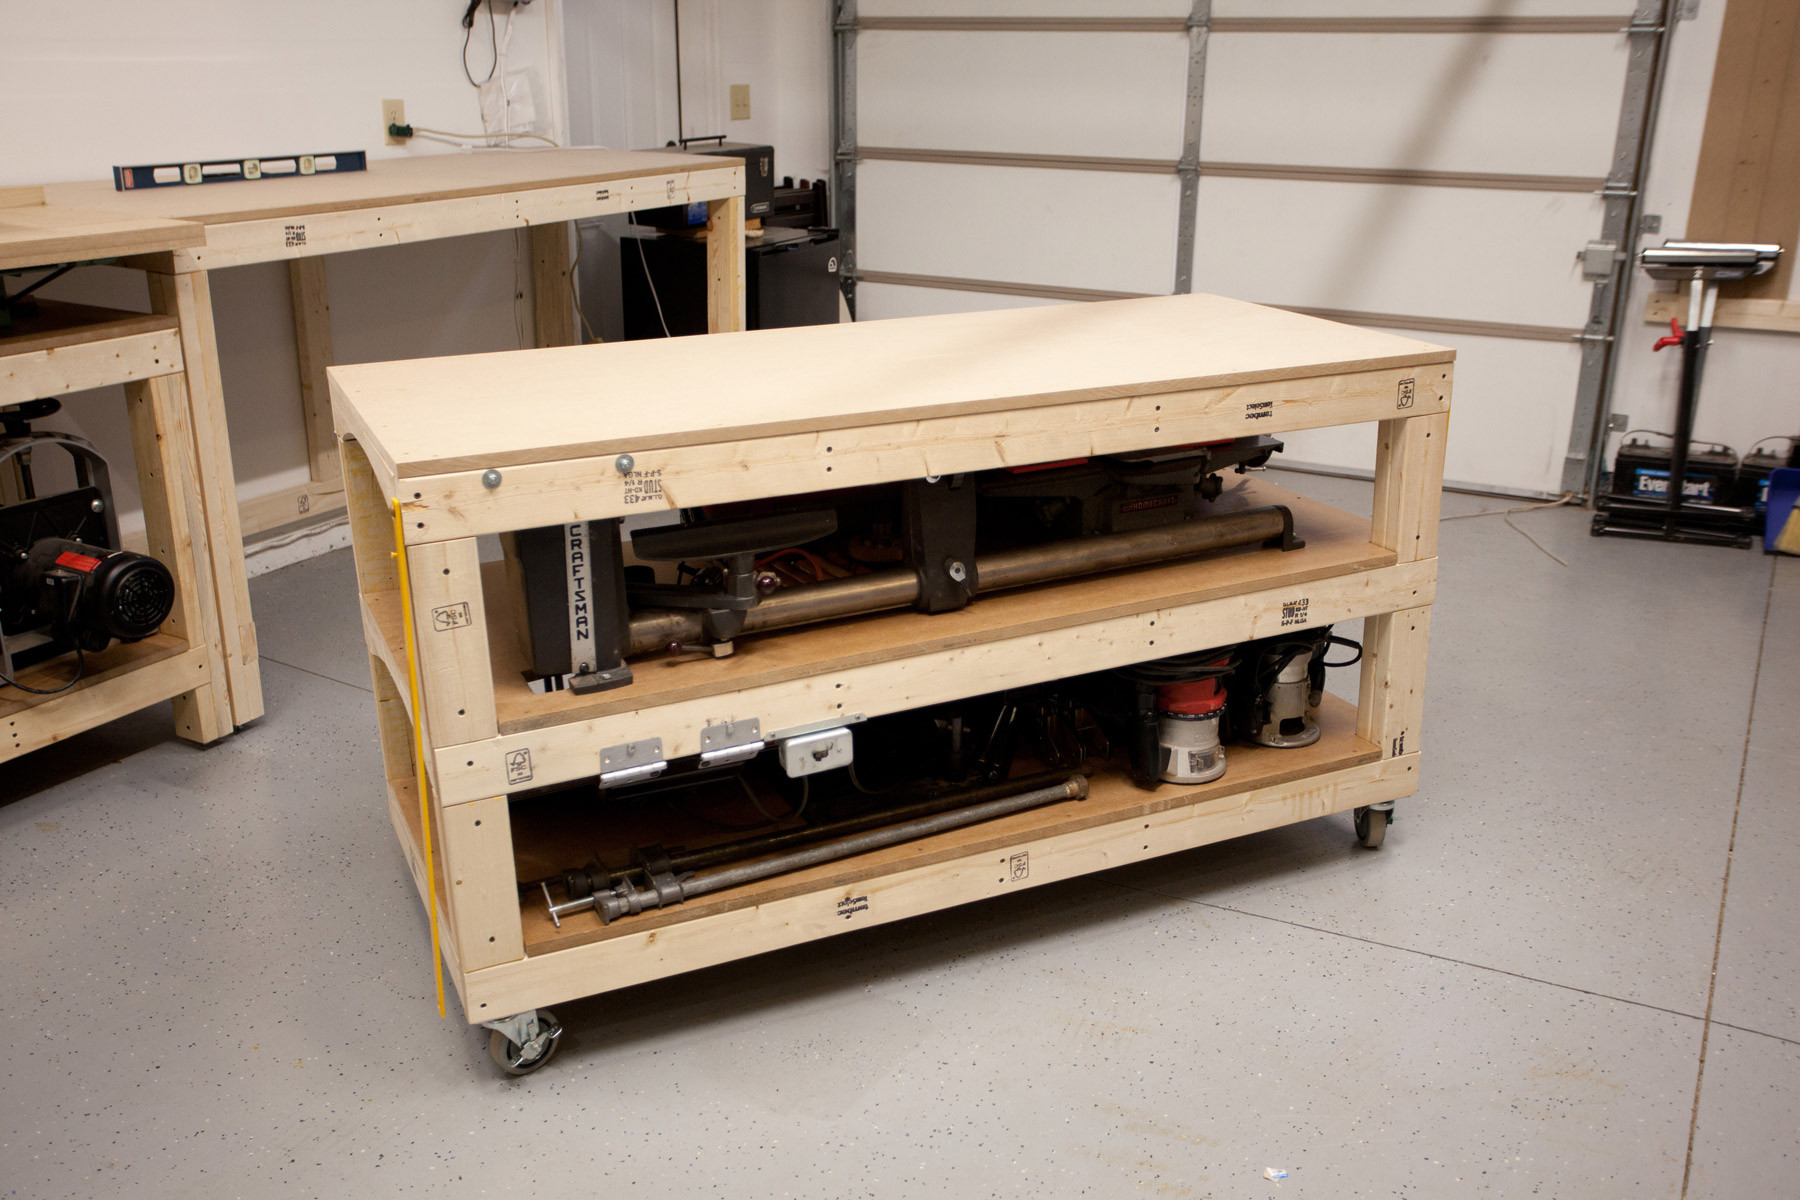 DIY Rolling Workbench Plans
 Workbench Plans Tommy s Rolling Workbench and Miter Saw